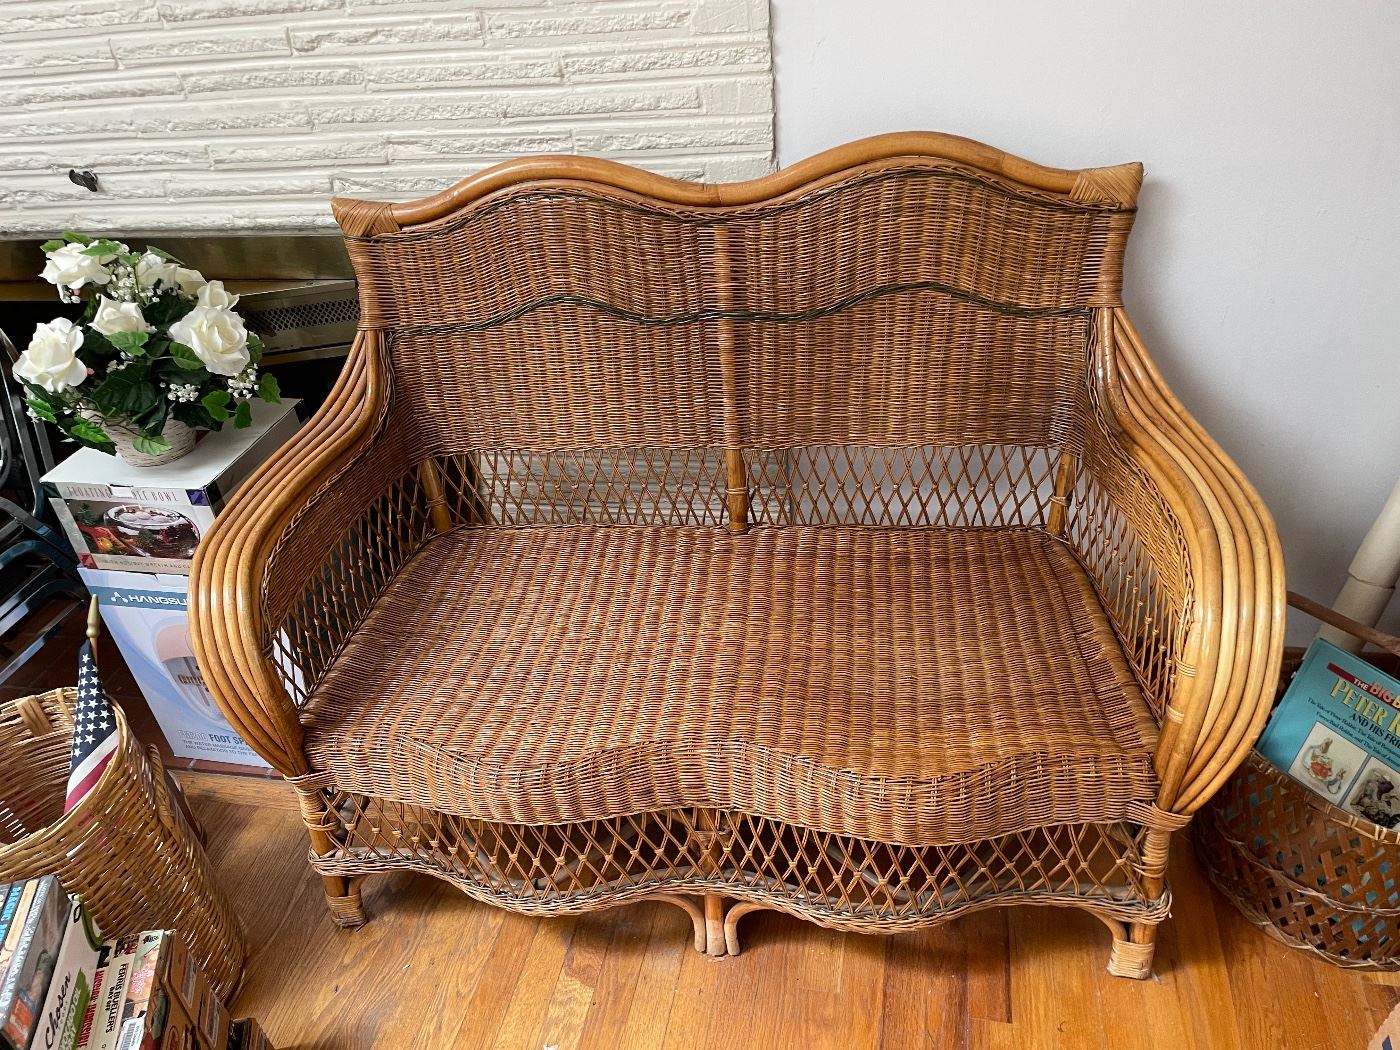 Bamboo settee in excellent condition. Missing the wrap on middle legs.